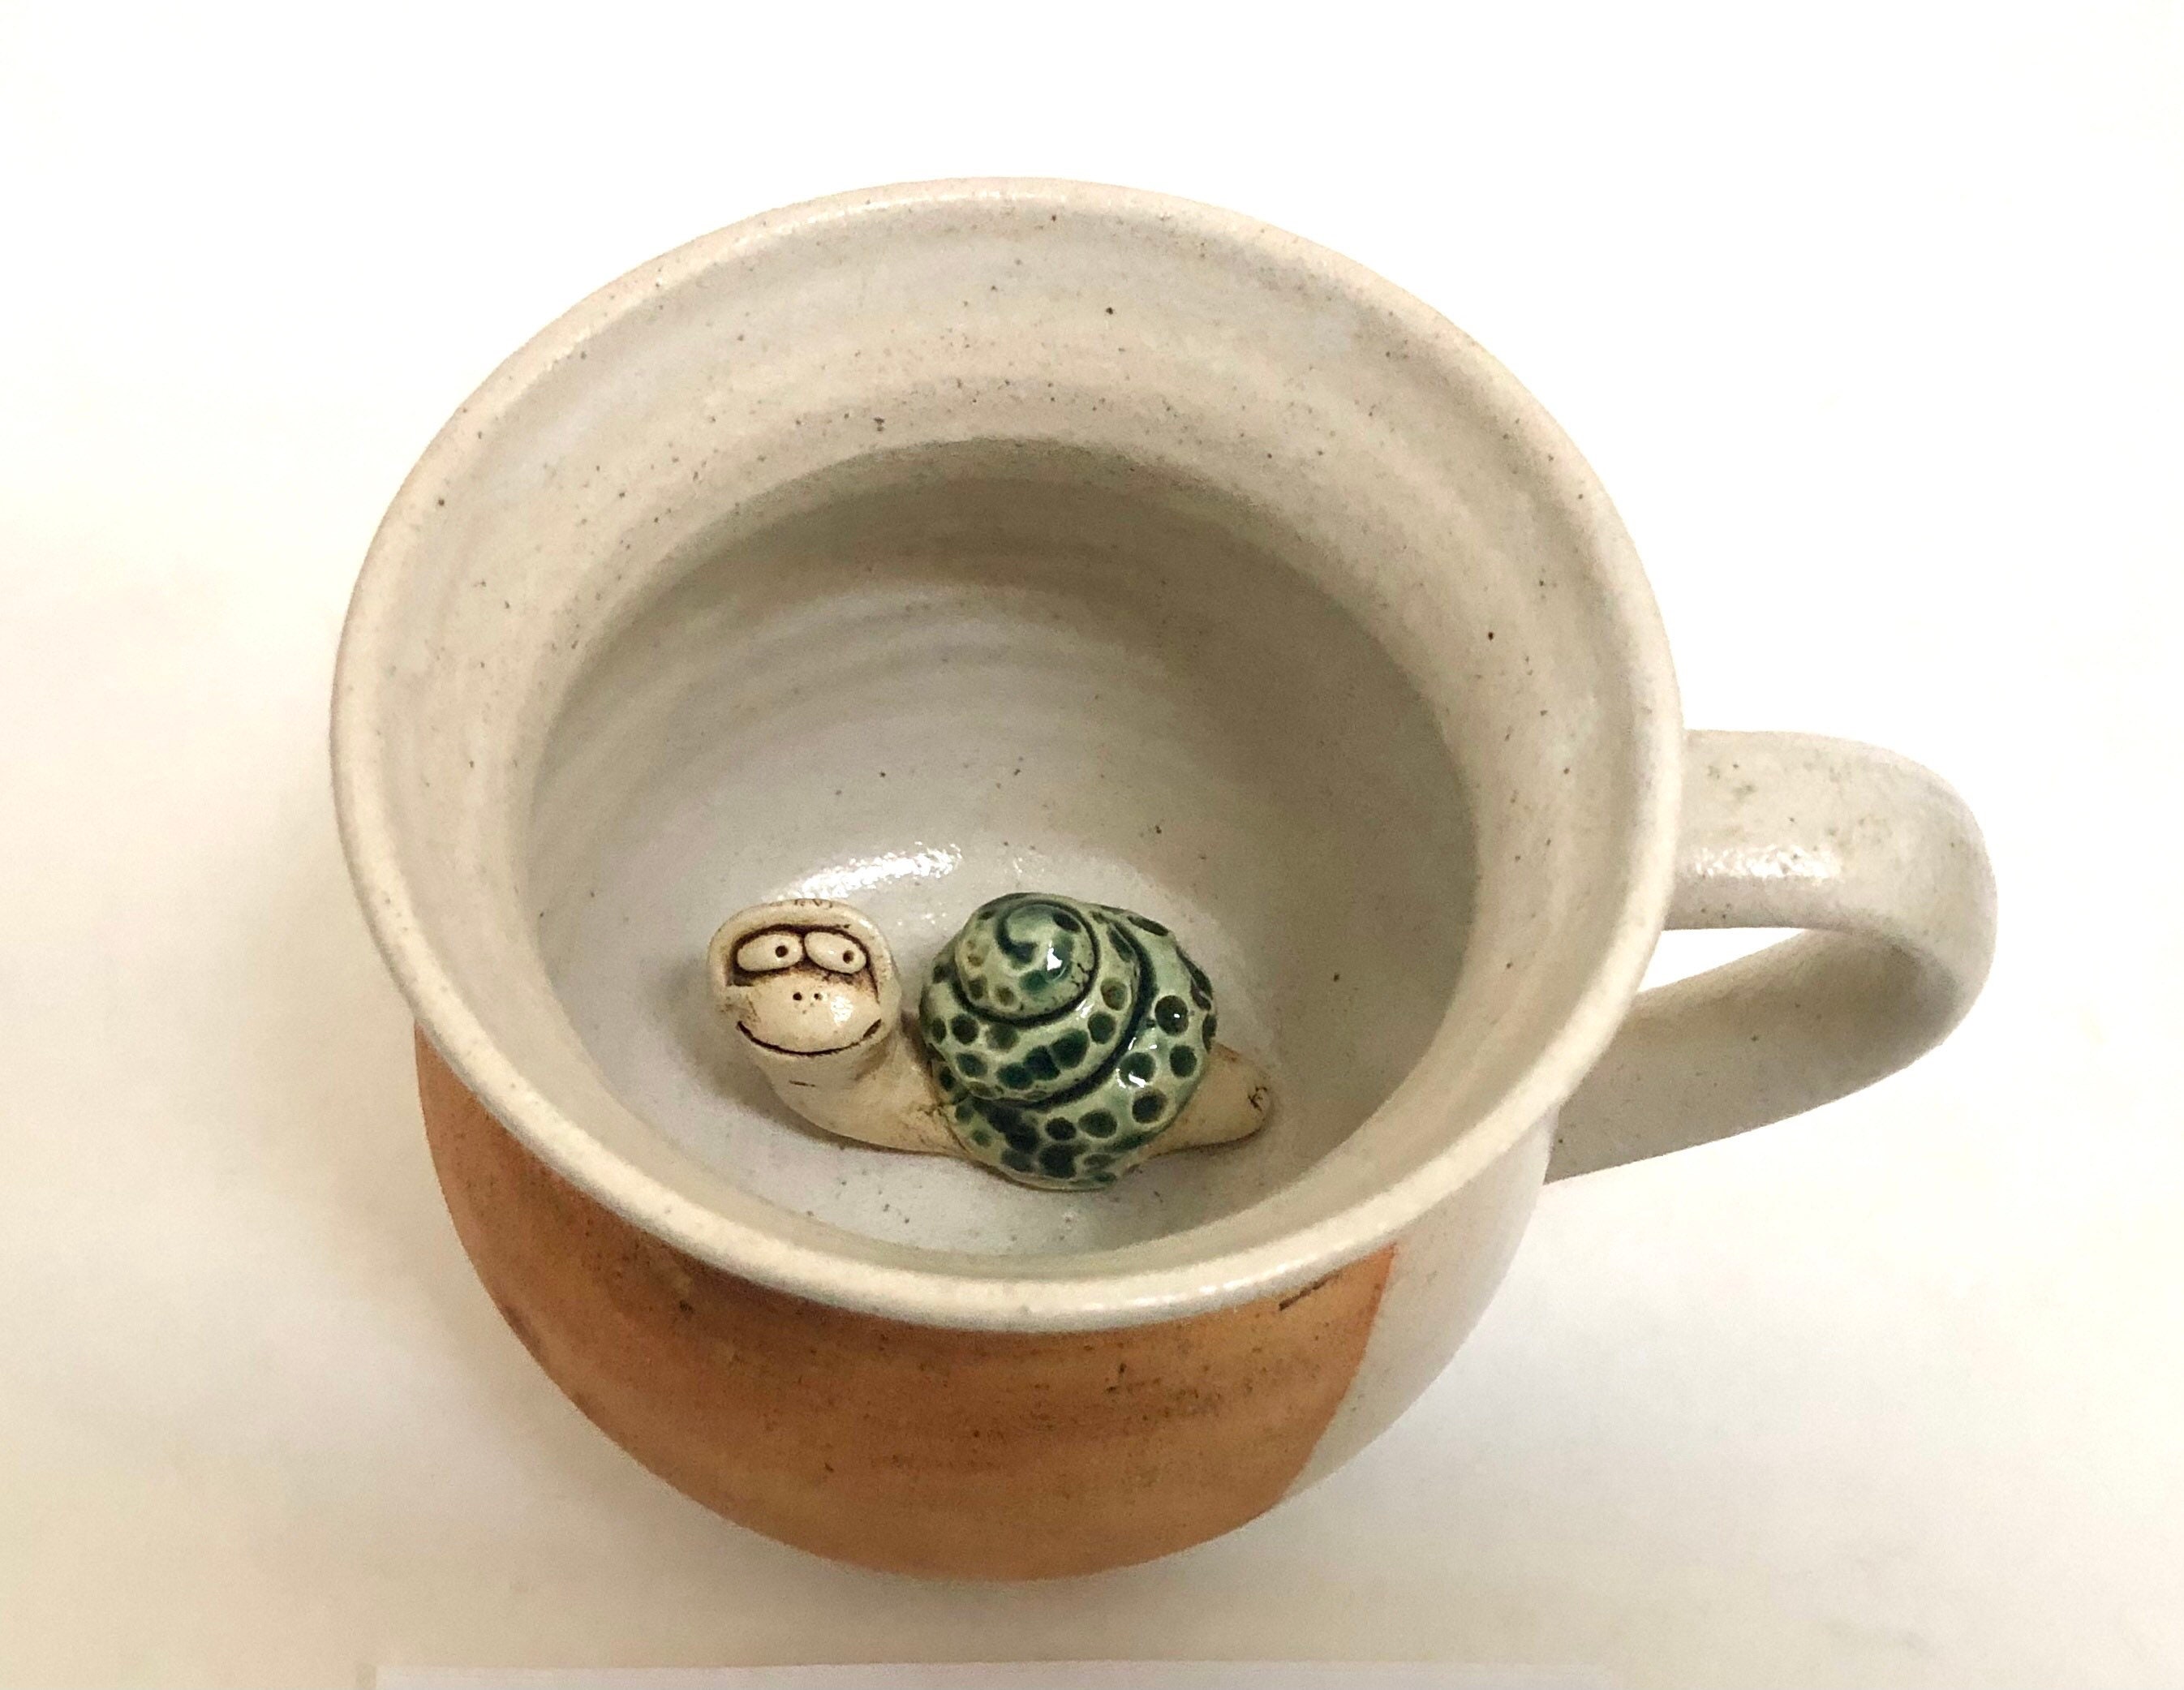 Whimsical Ceramic Mugs Have Animal Sculptures Hidden in the Side